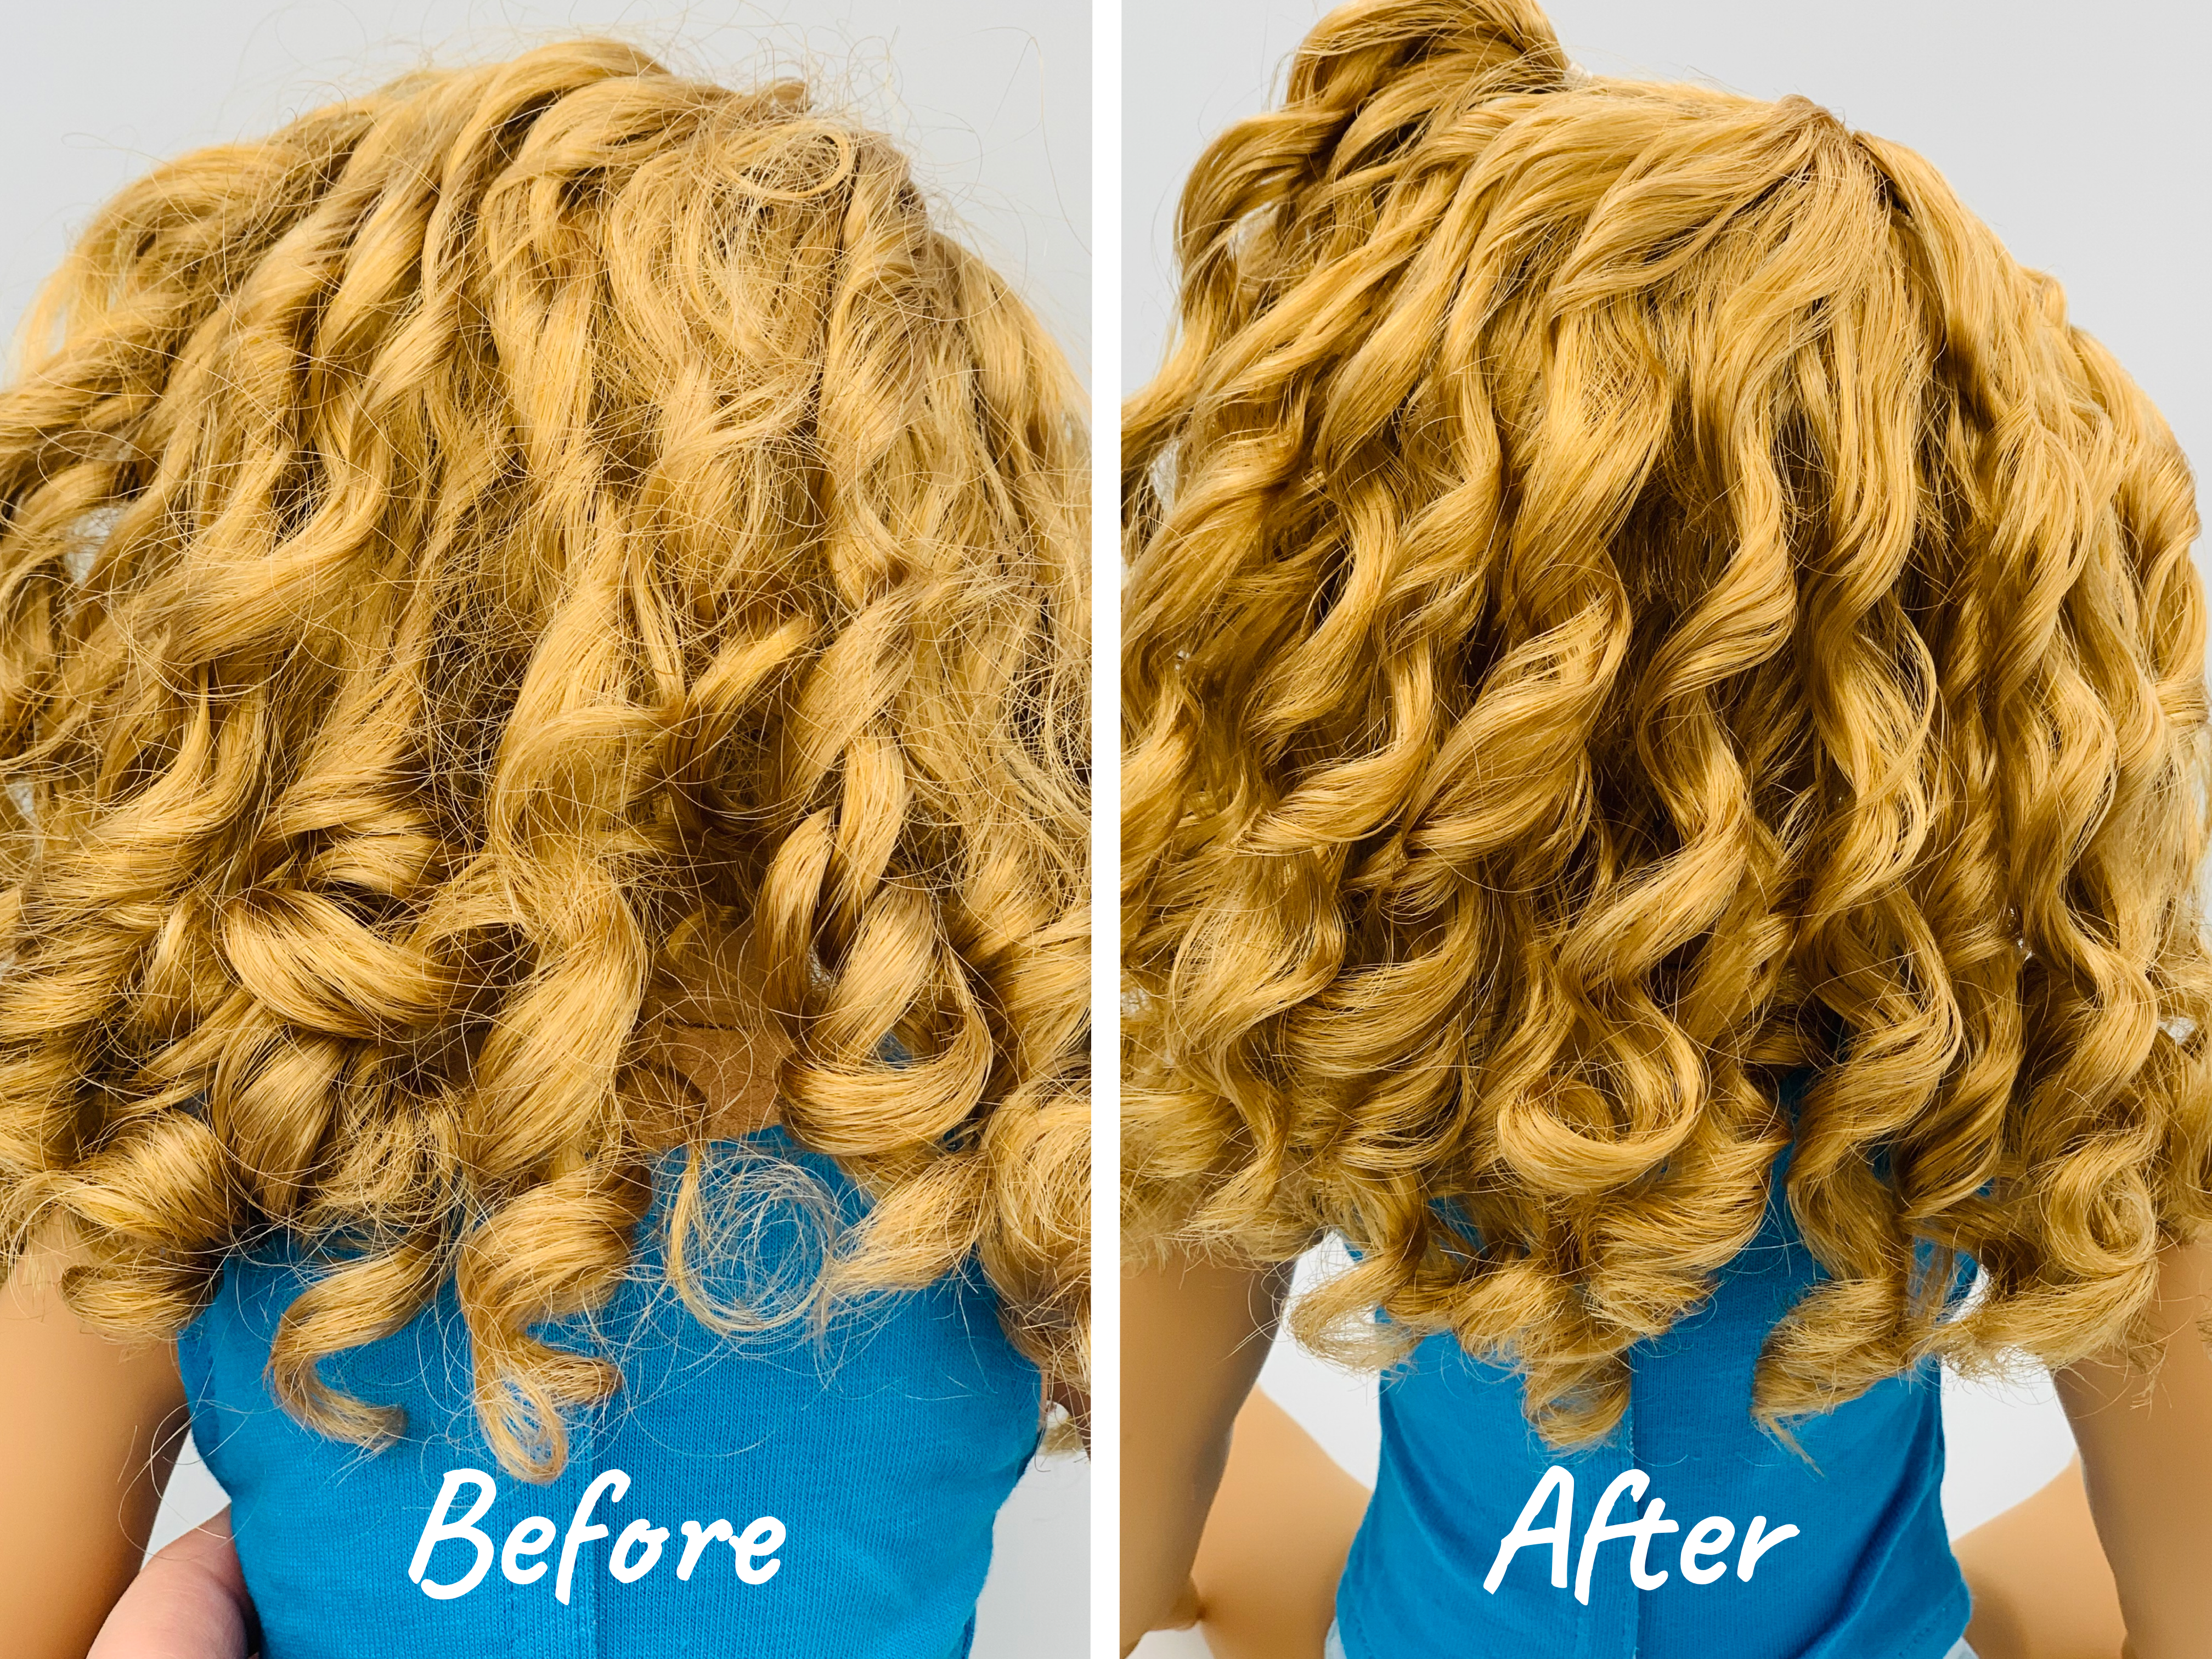 How to Re-curl American Girl Doll Hair